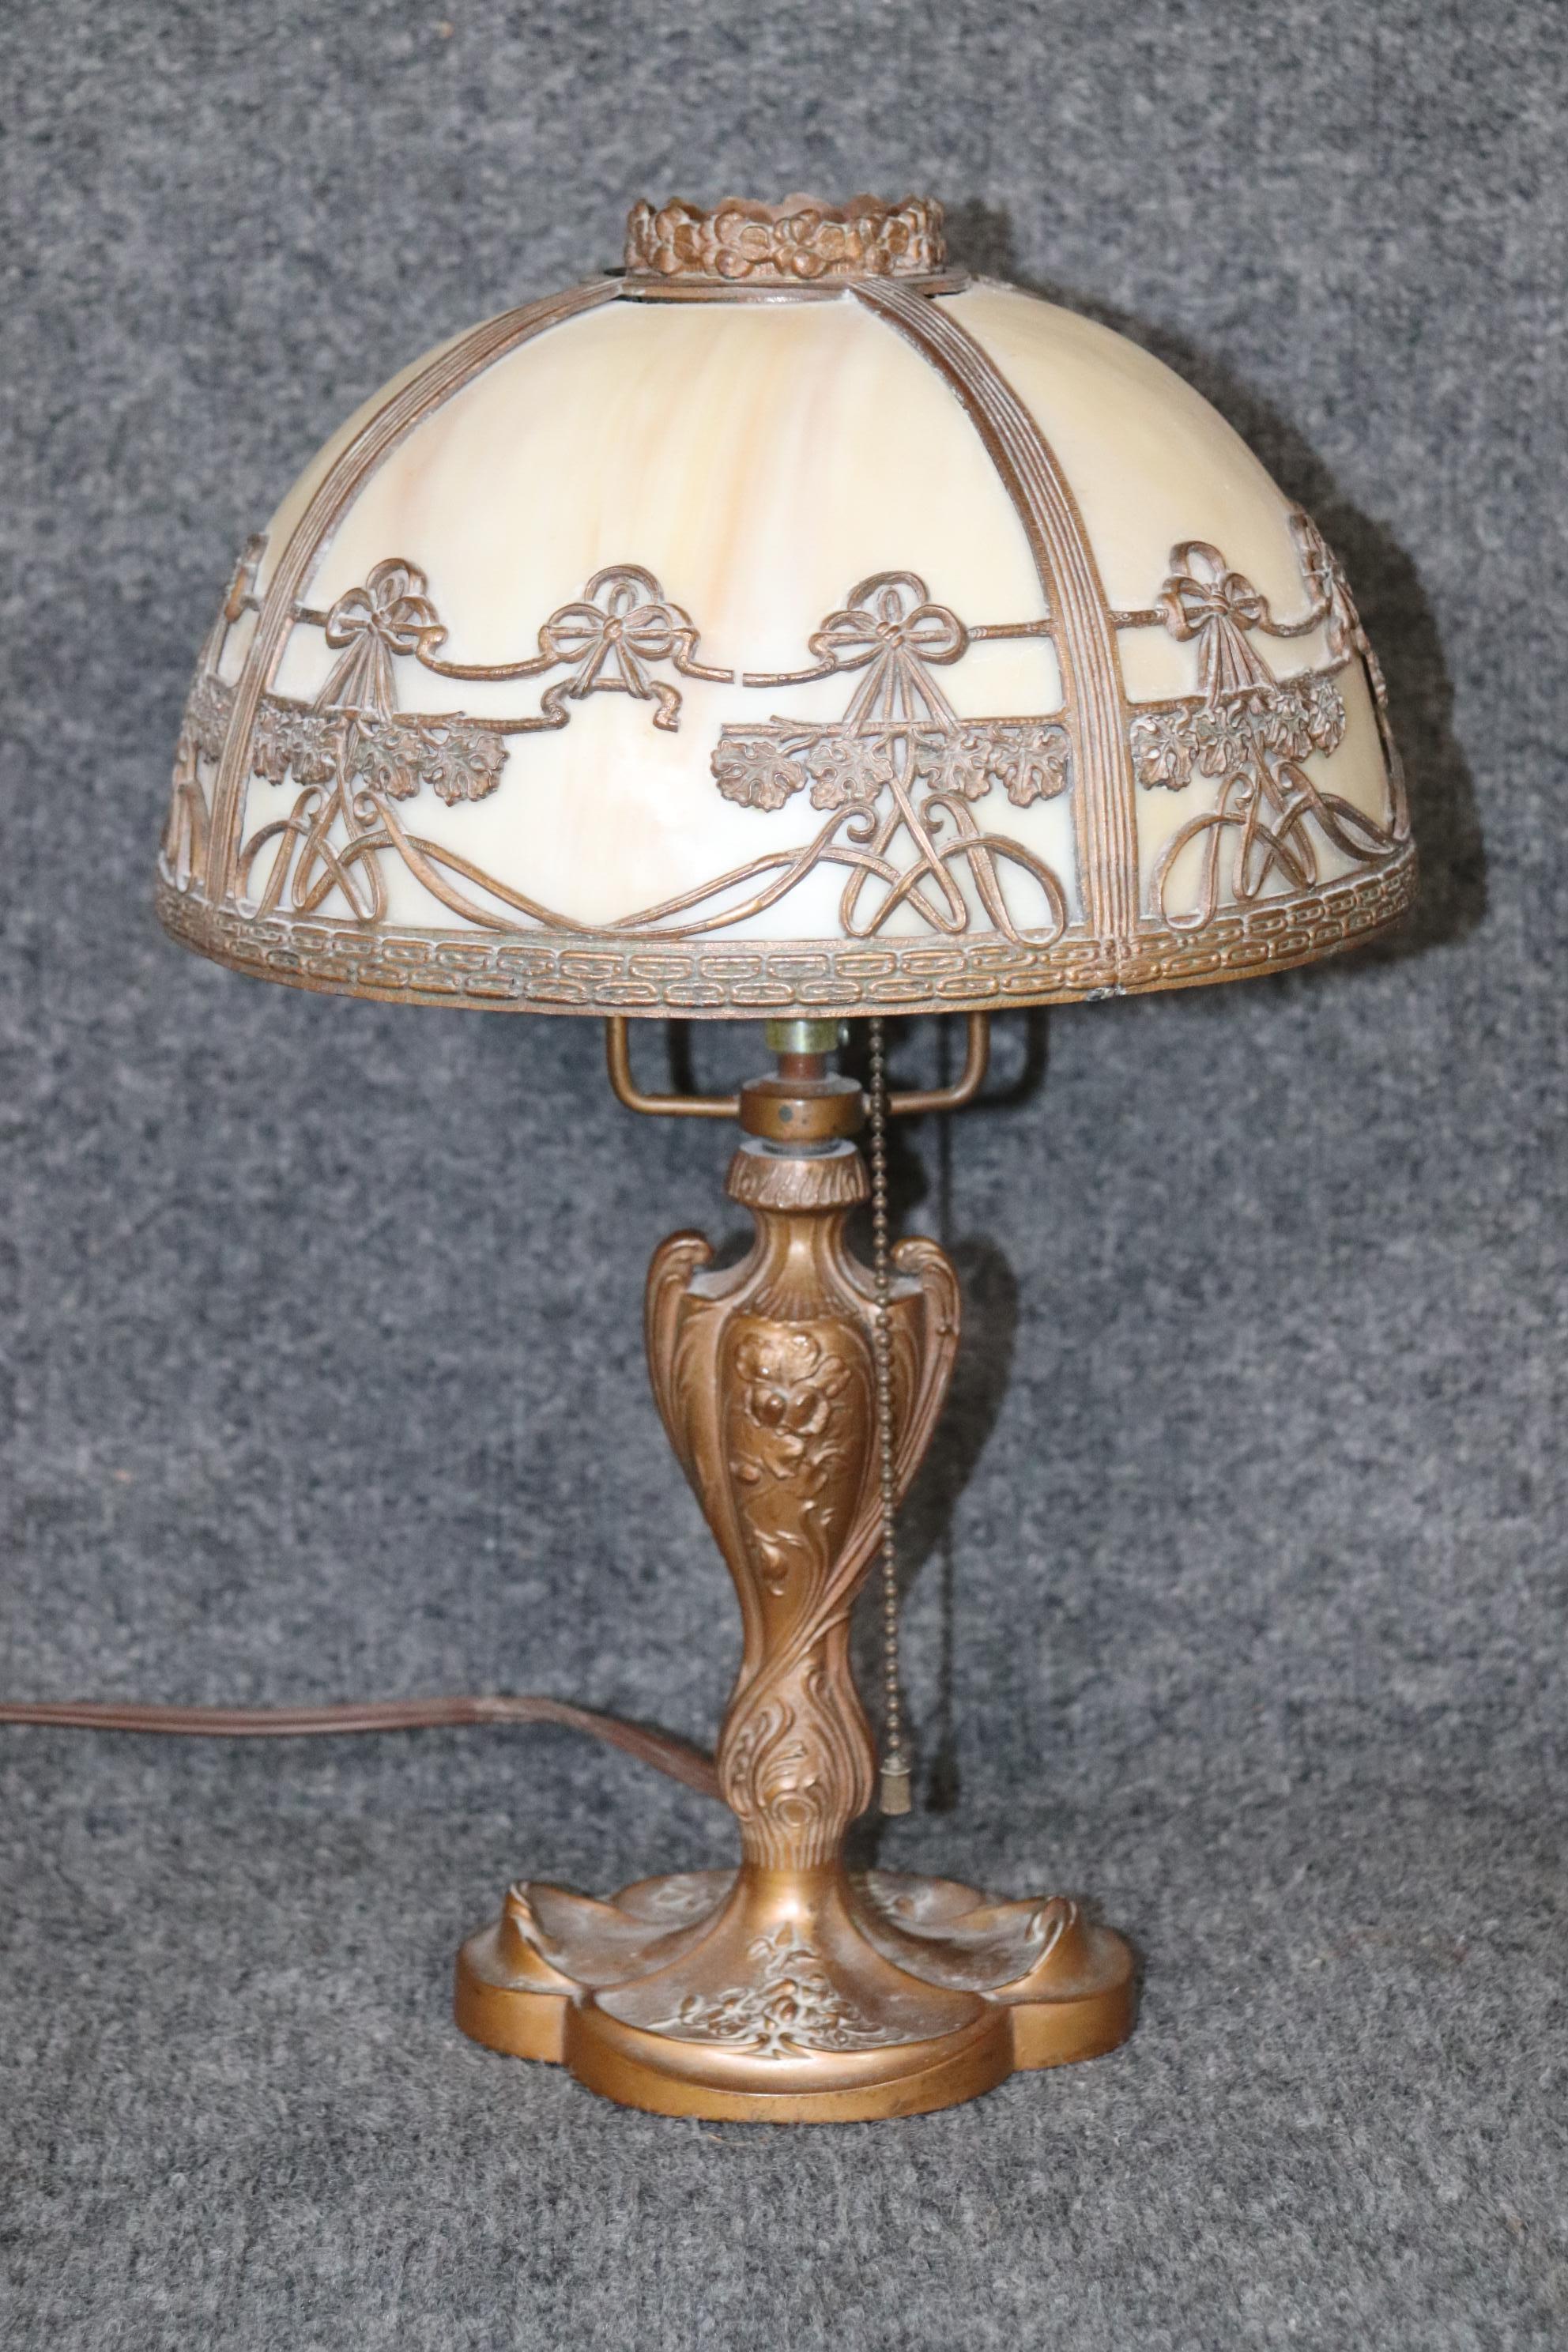 This is a beautiful bronze colored spelter base slag glass lamp in the art nouveau style in good condition. The wiring may need to be redone as it is antique.